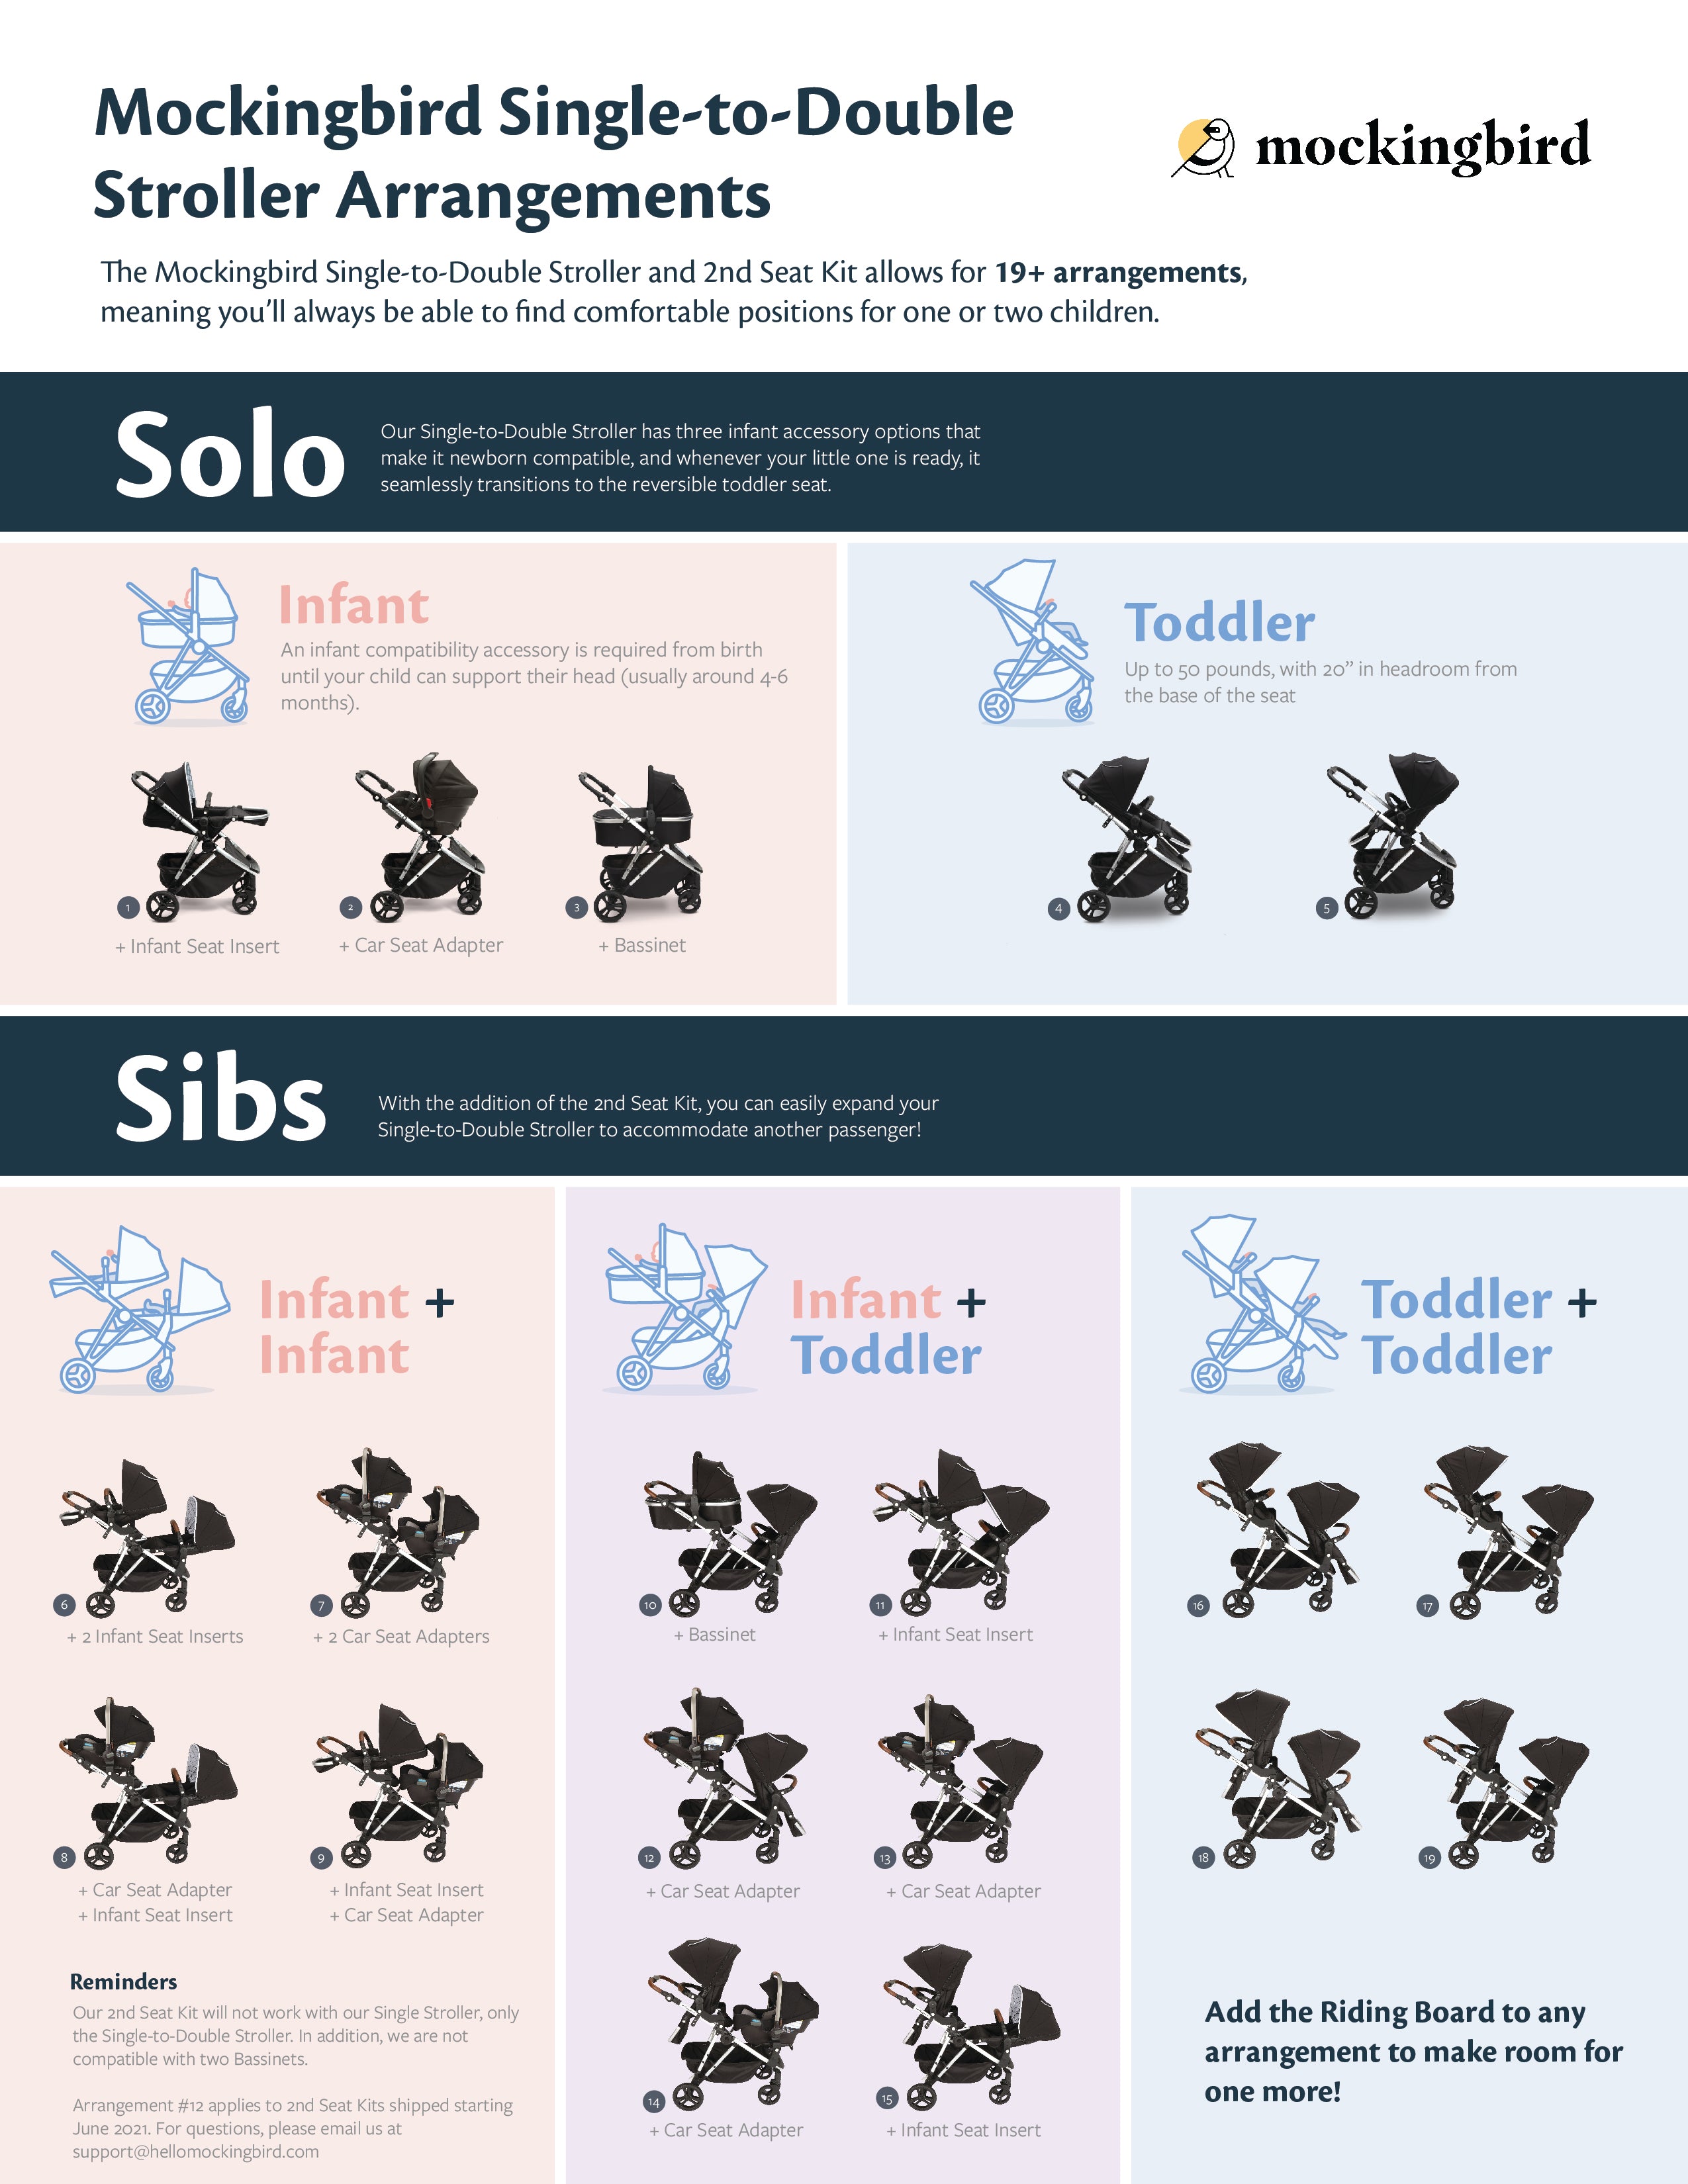 Infographic showing the transformation of mockingbird strollers from single to double configurations, with sequential visual and text instructions.